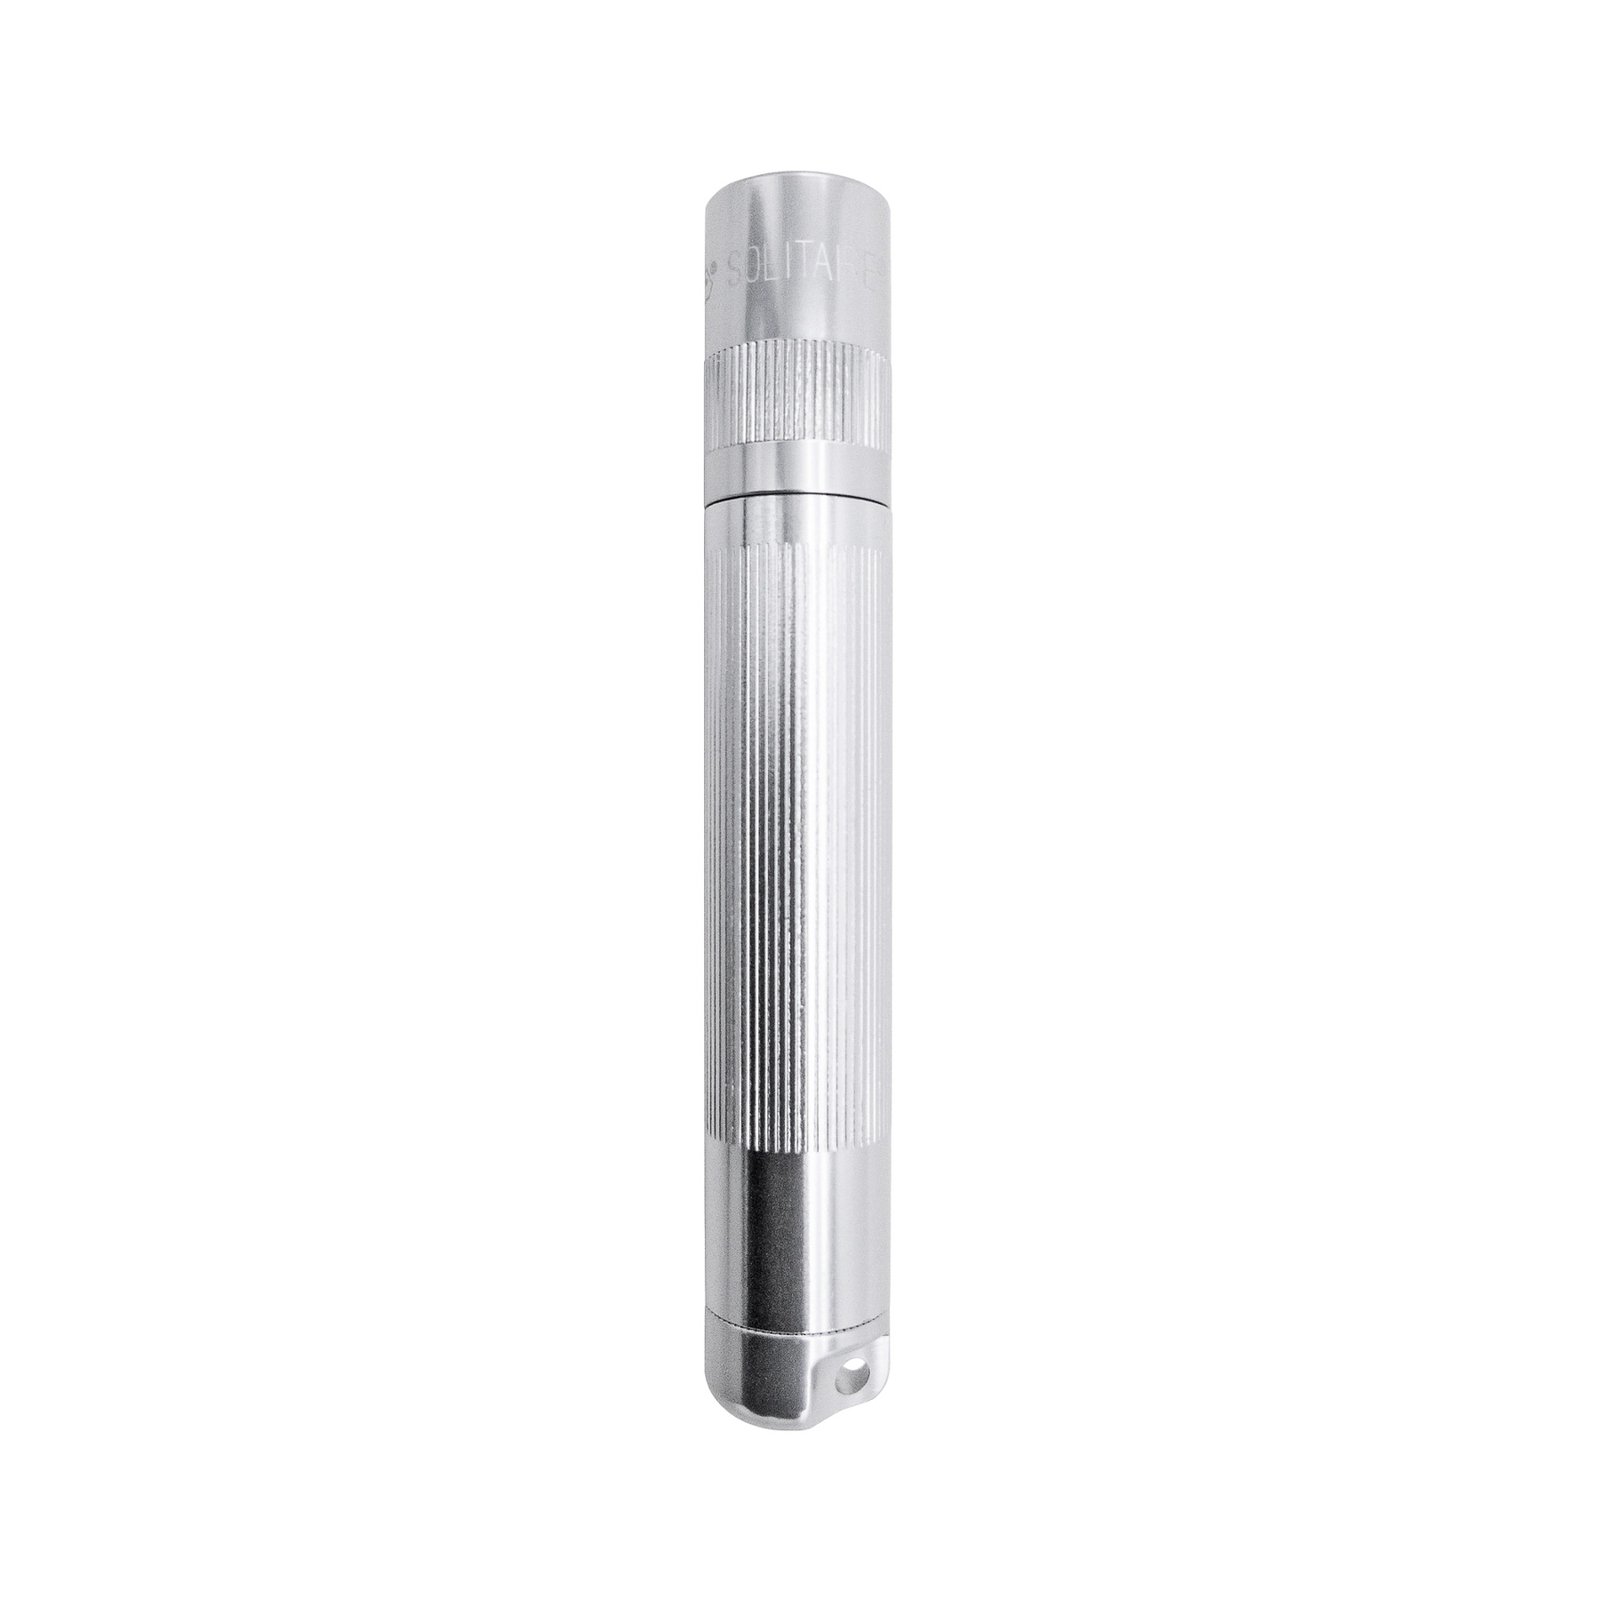 Maglite LED zaklamp Solitaire, 1 Cell AAA, box, zilver